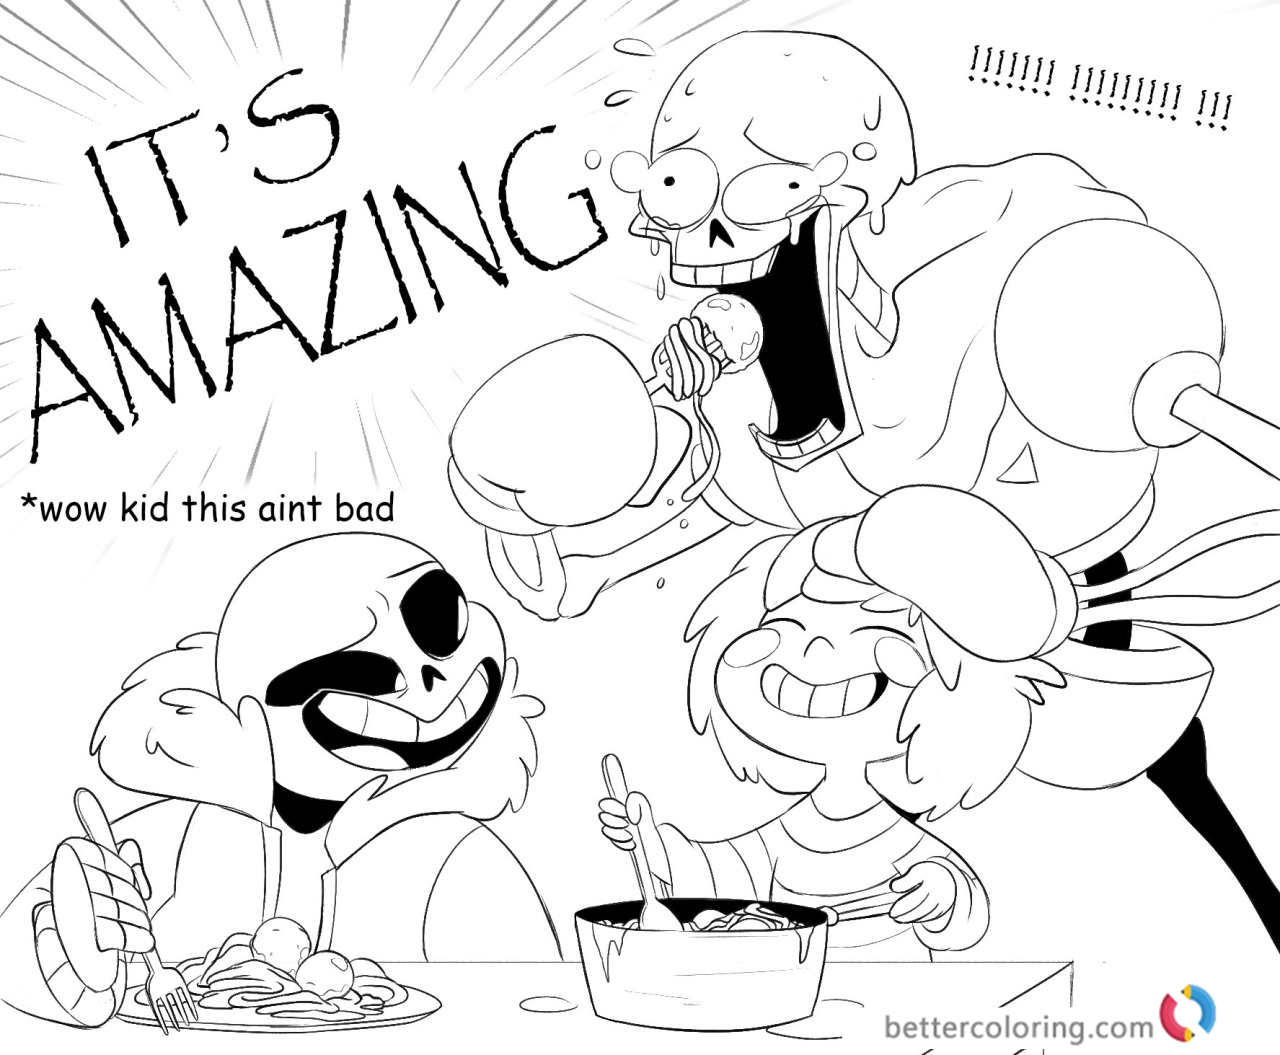 Undertale coloring pages wow kid Free Printable Coloring Pages